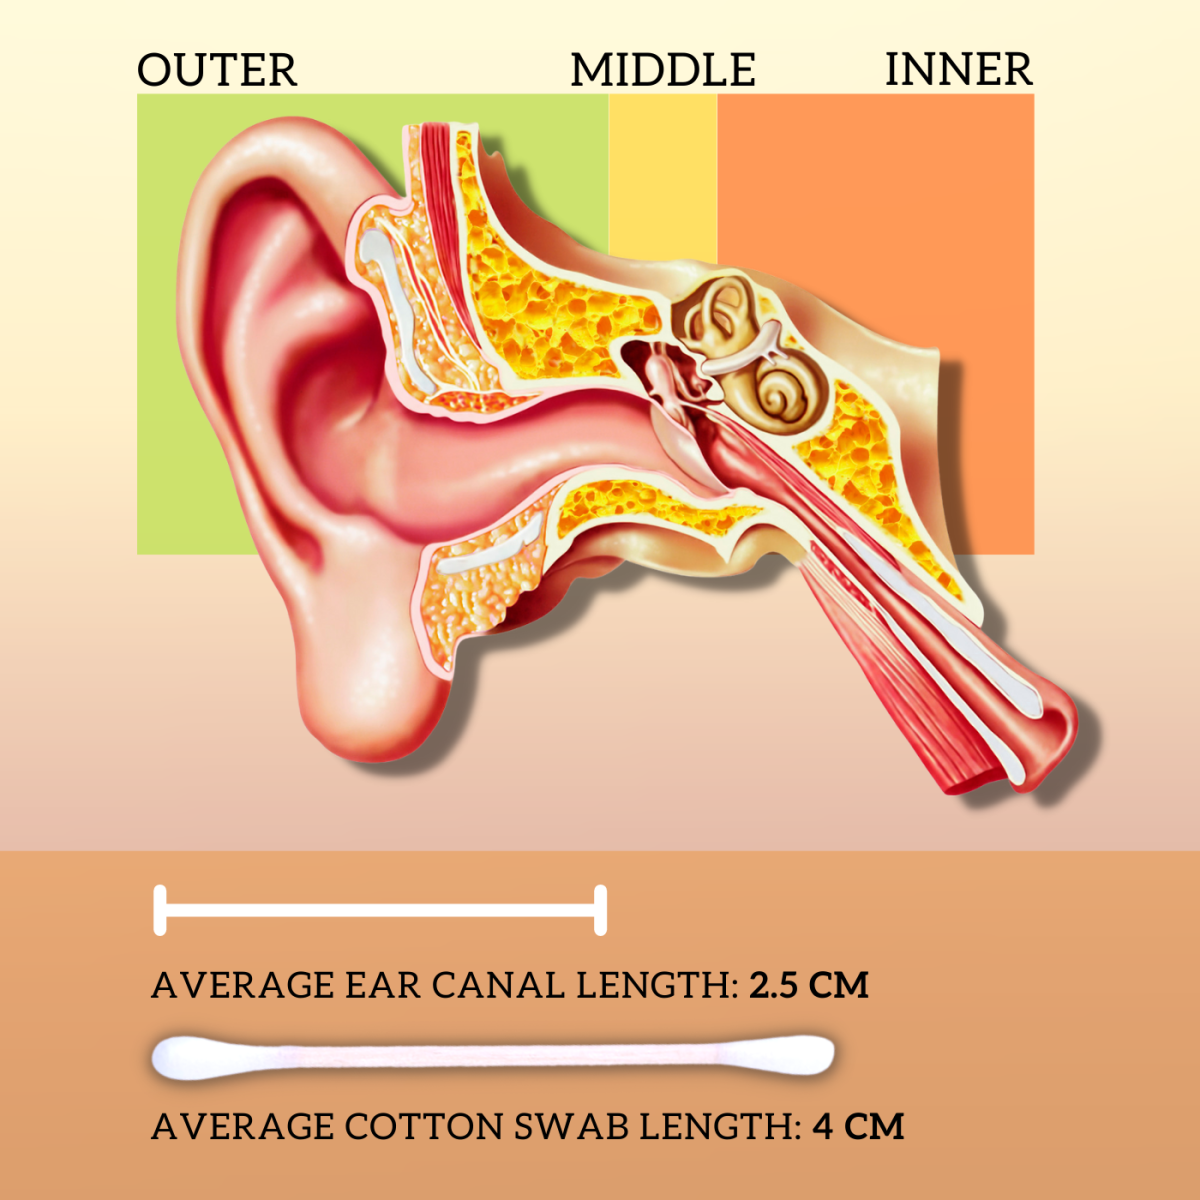 Cotton swabs can easily damage the eardrum by scratching, bumping, or shoving ear wax towards it. 